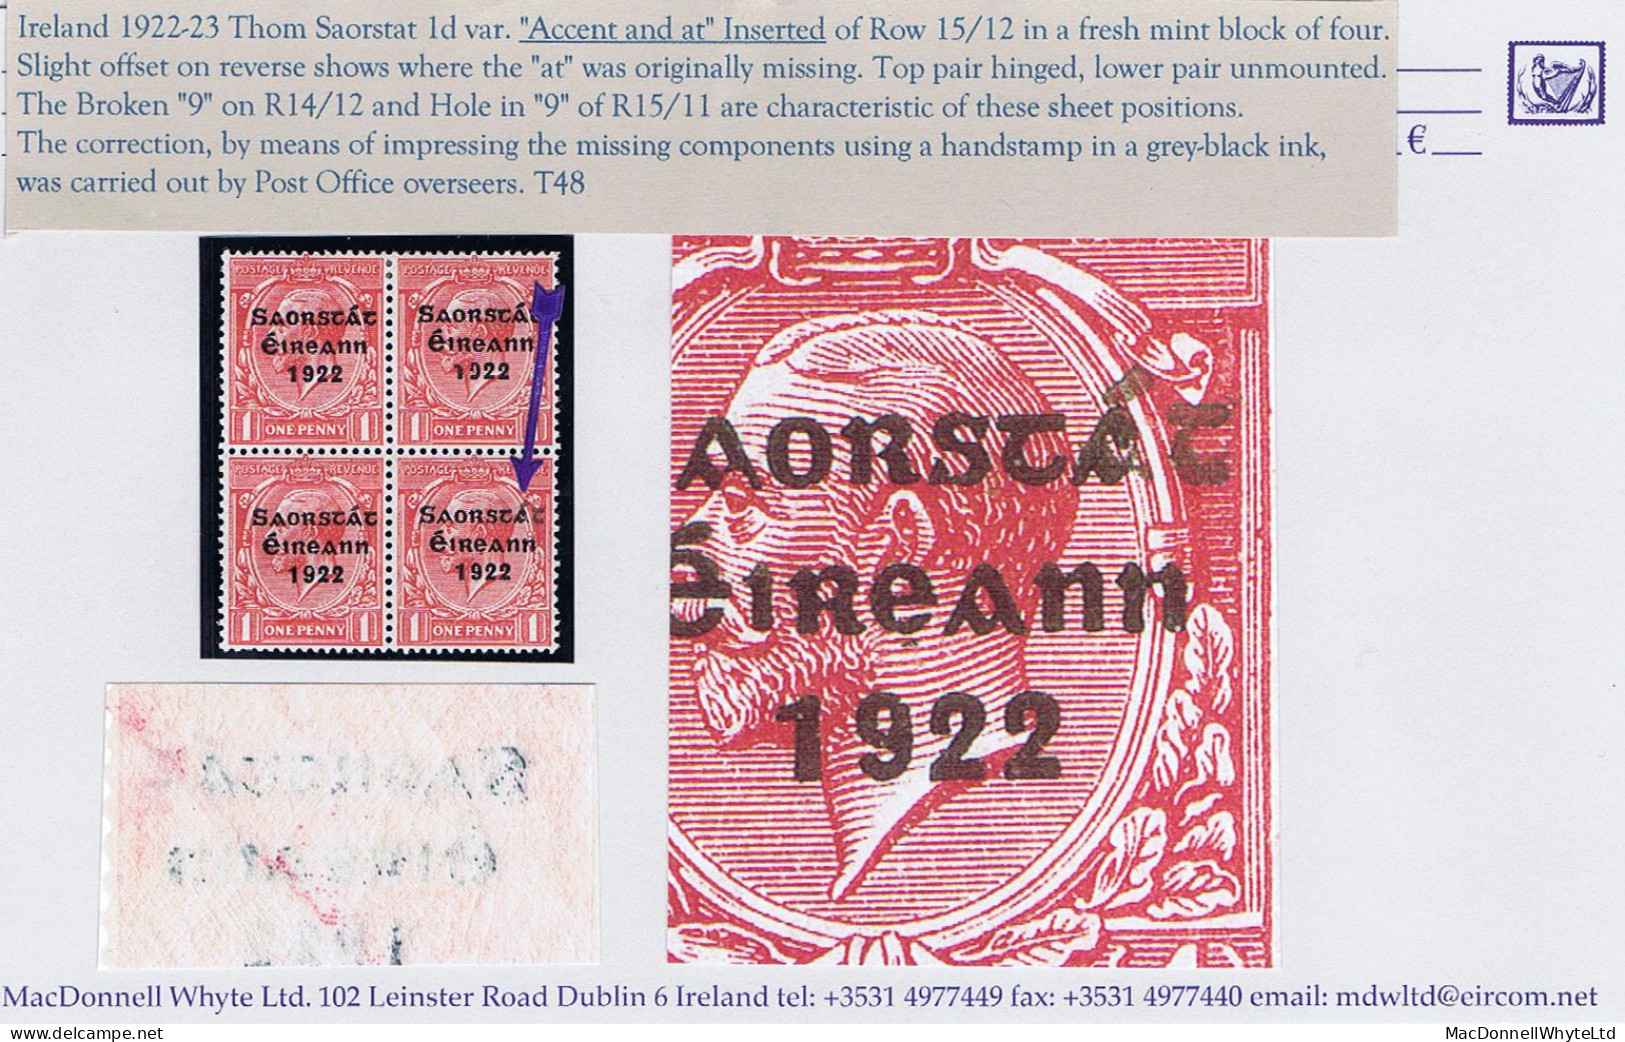 Ireland 1922-23 Thom Saorstat 1d Variety "Accent And At Inserted By Hand" R15/12 In A Block Of 4 Mint - Unused Stamps